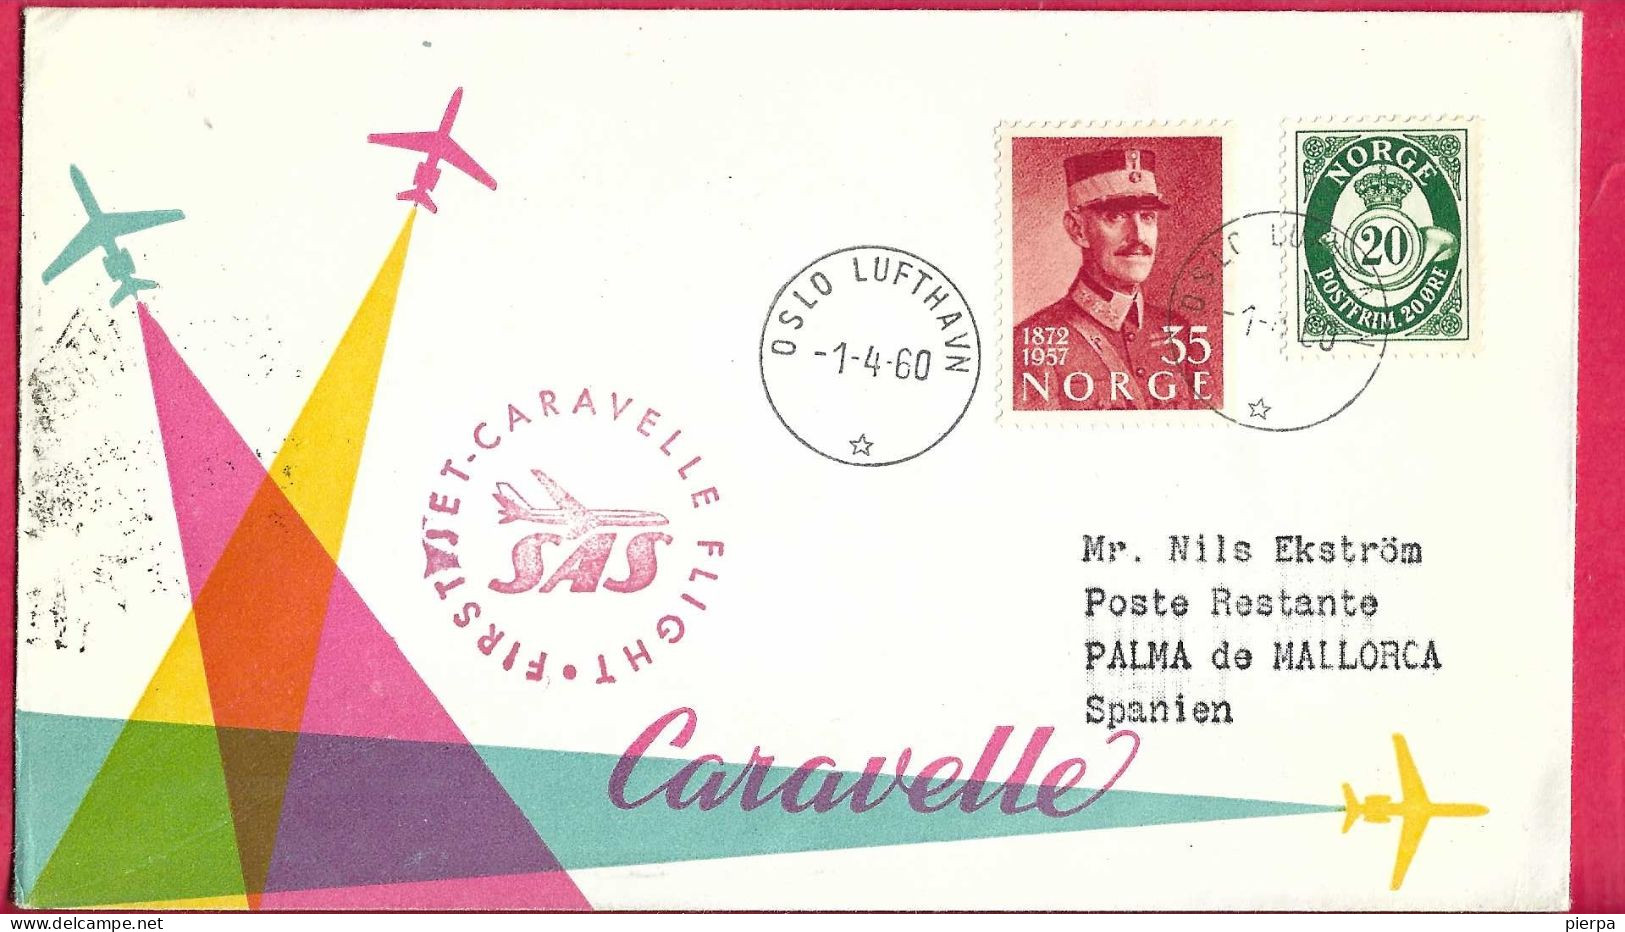 NORGE - FIRST CARAVELLE FLIGHT - SAS - FROM OSLO TO PALMA DE MALLORCA *1.4.60* ON OFFICIAL COVER - Briefe U. Dokumente